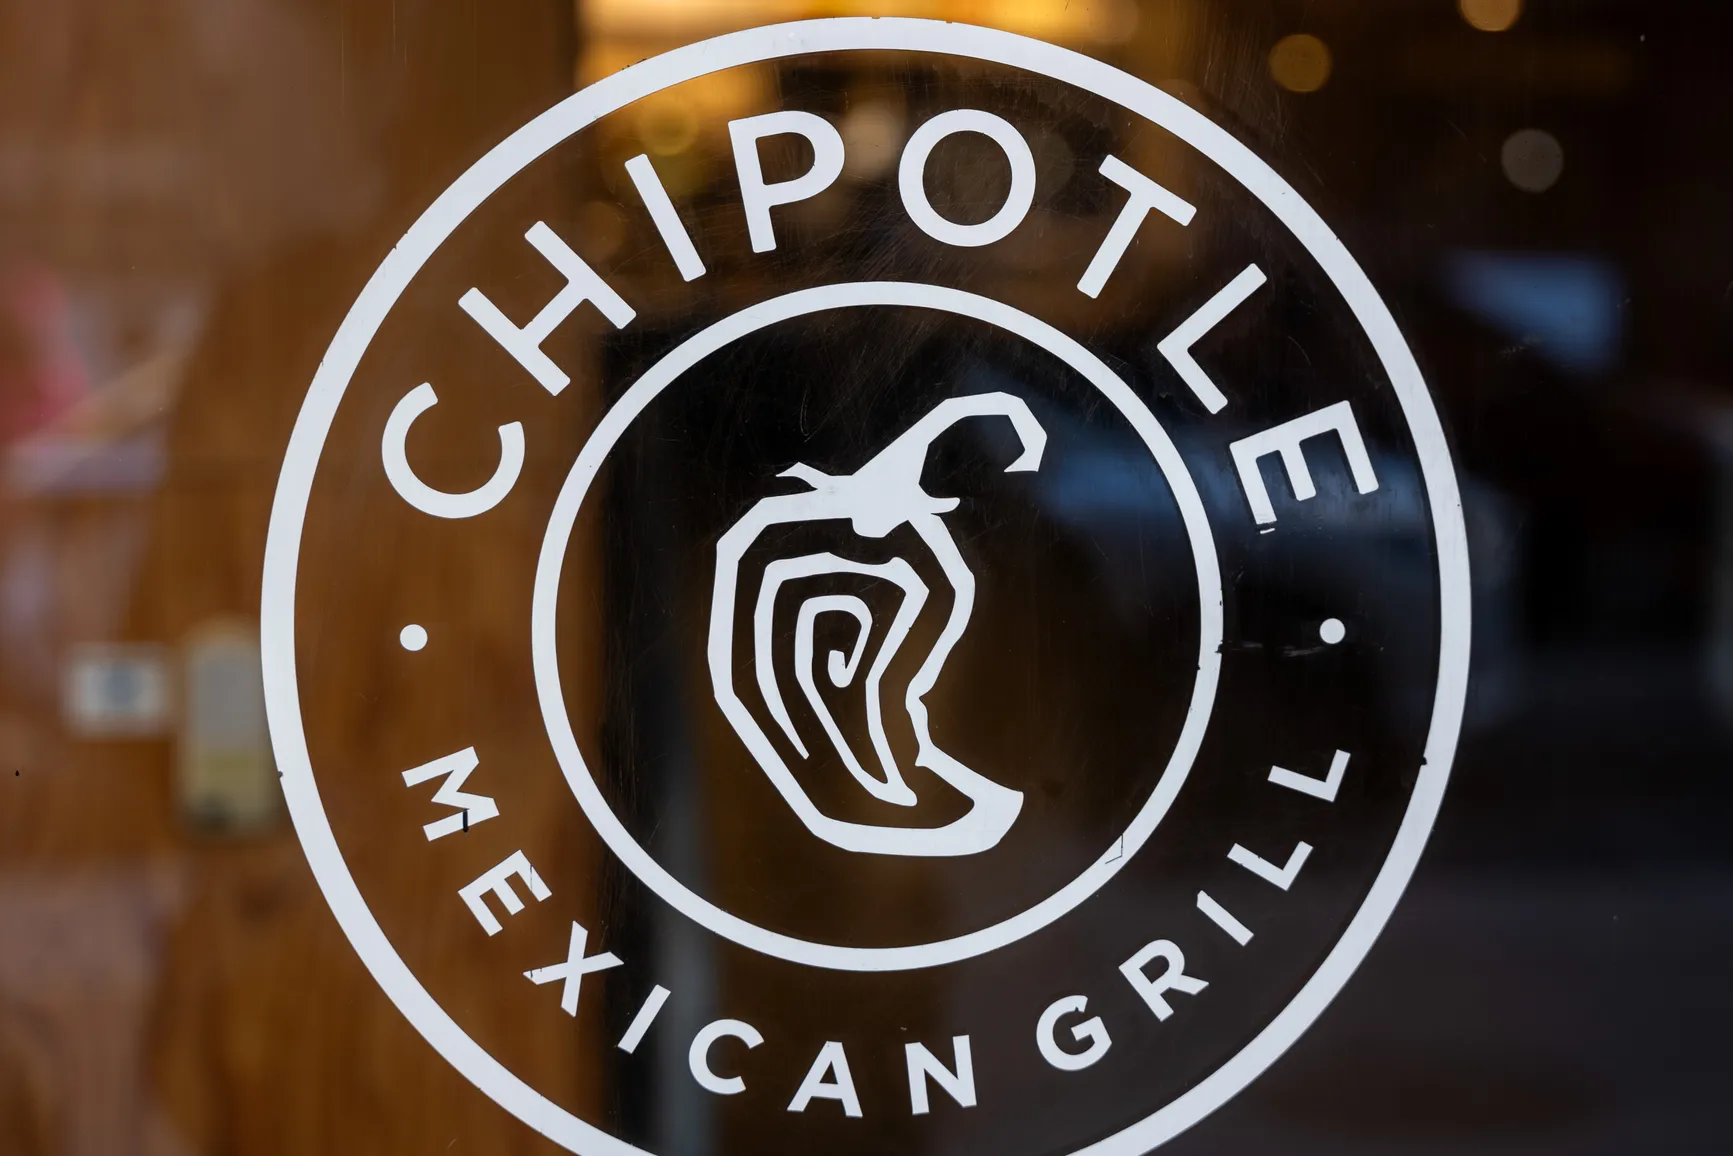 Chipotle Responds to Portion Size Concerns with Renewed Commitment to Generous Servings